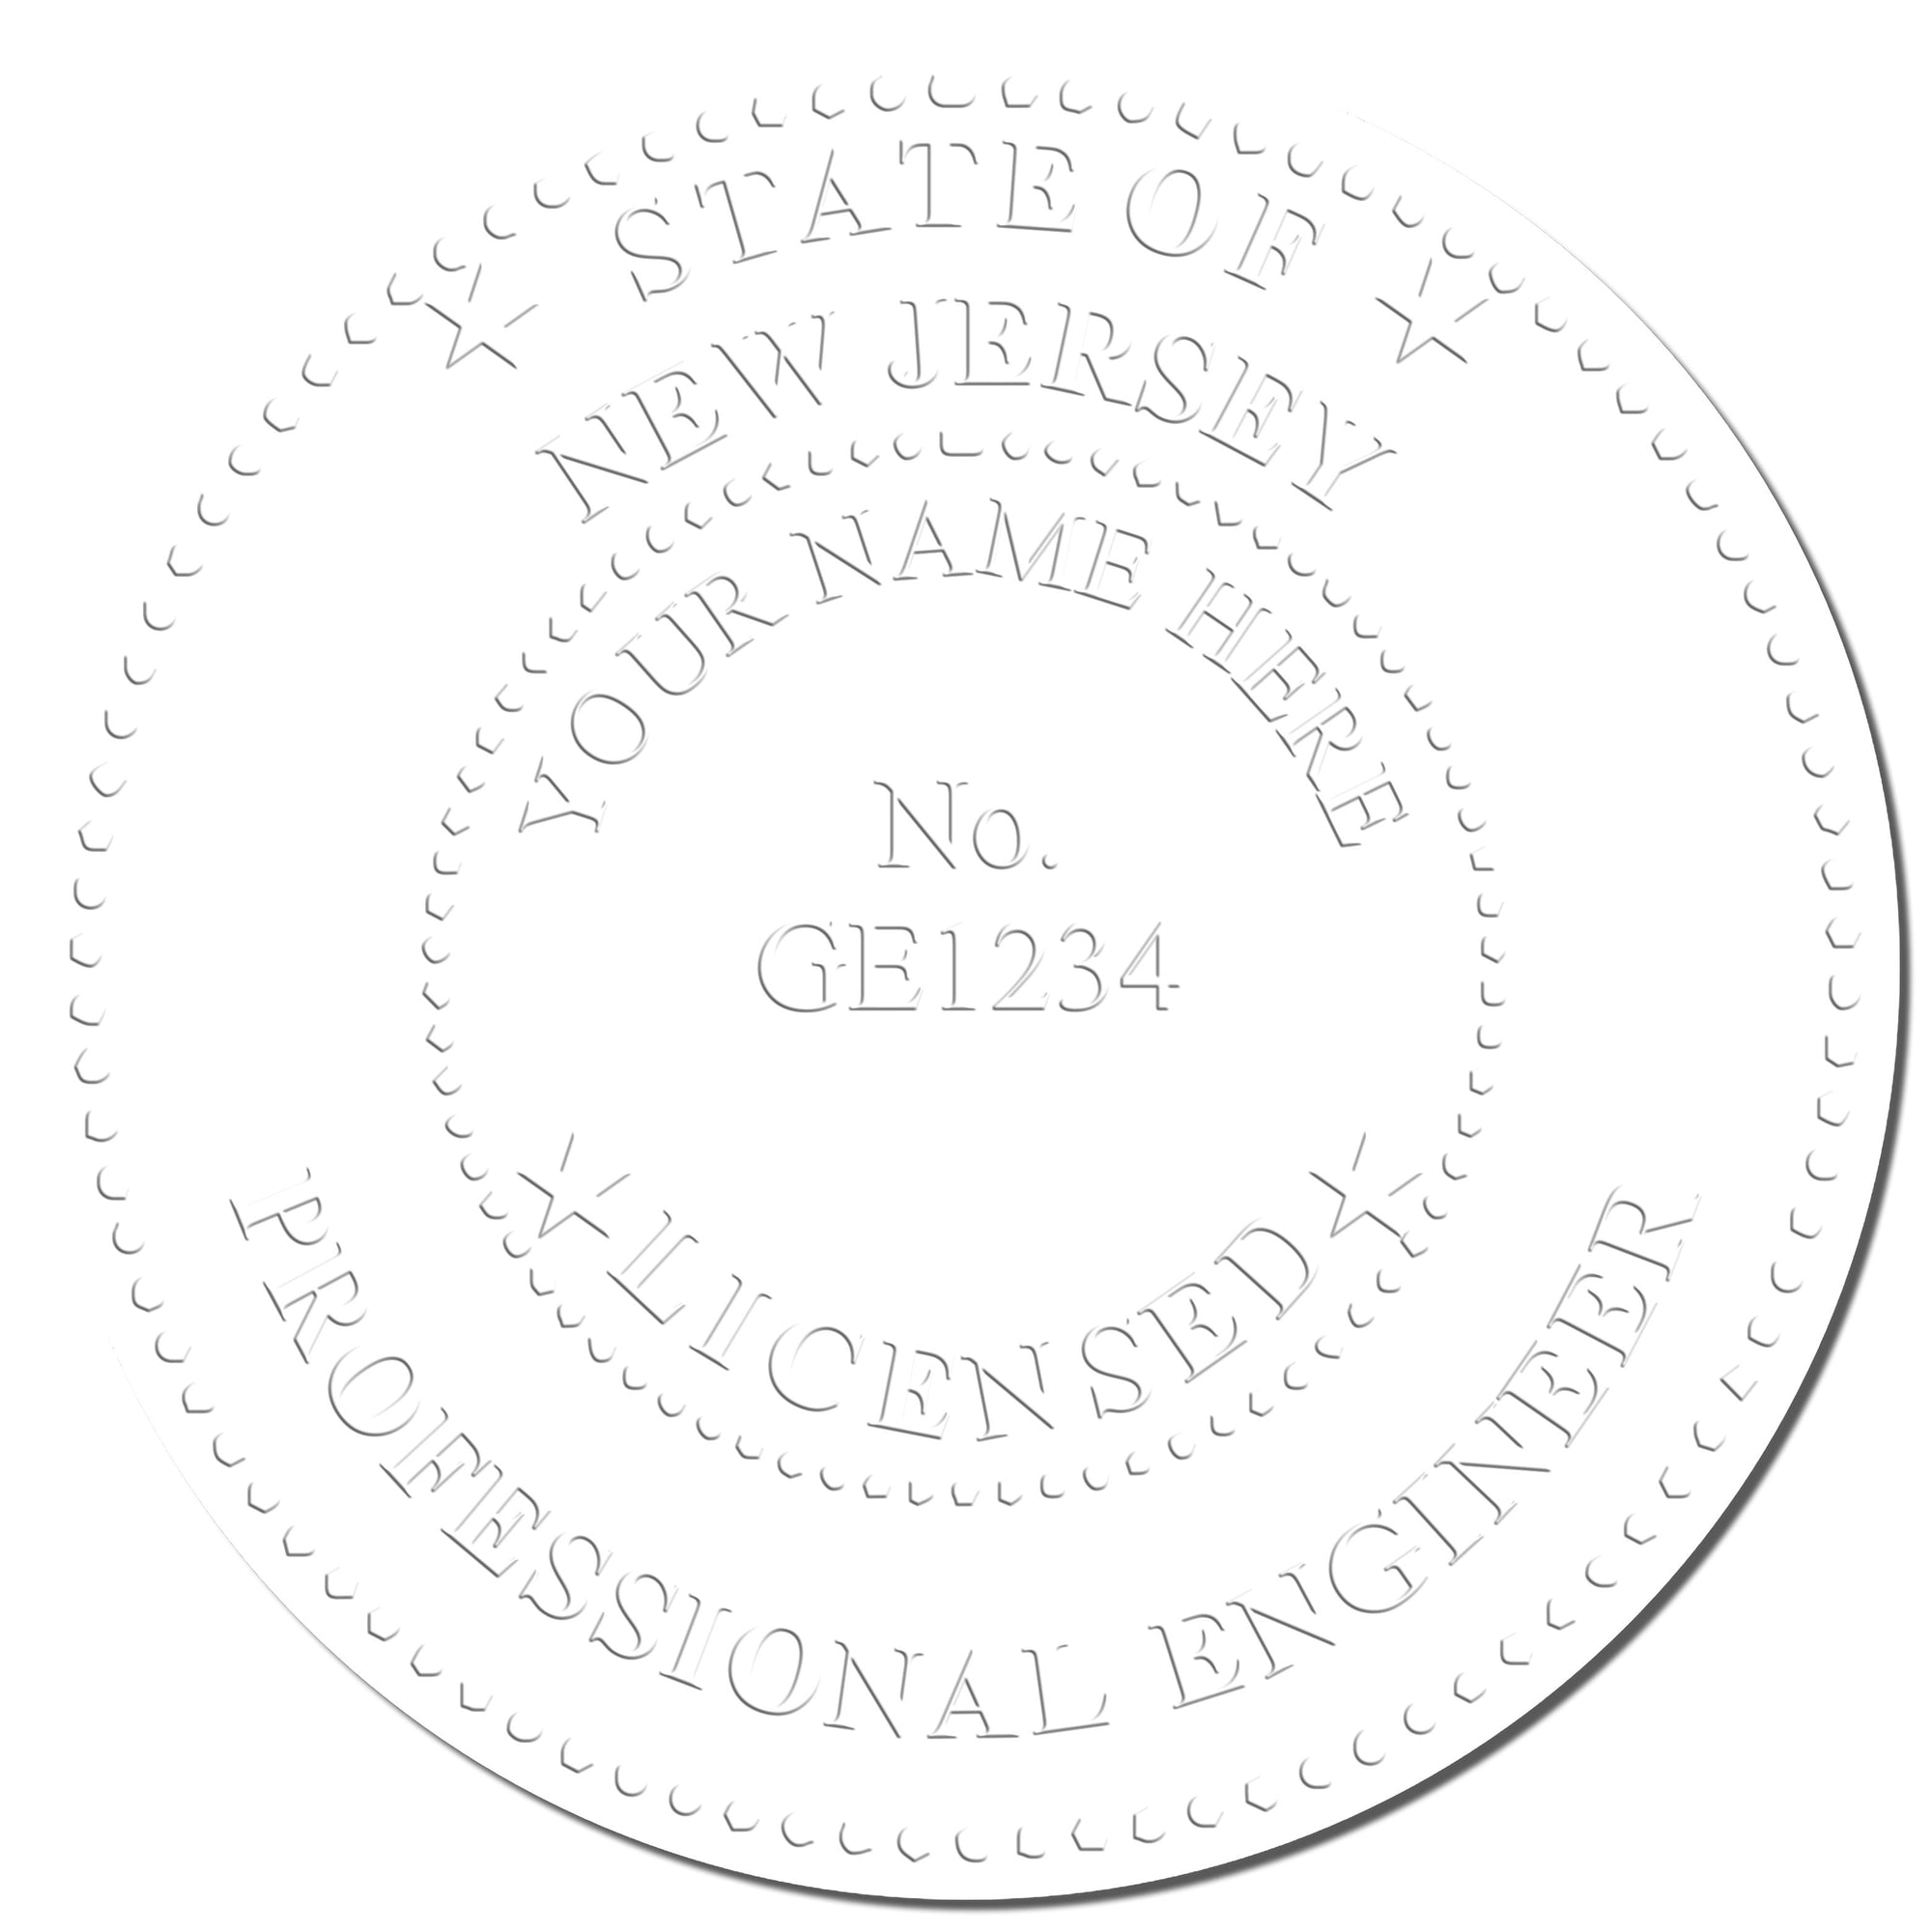 The main image for the New Jersey Engineer Desk Seal depicting a sample of the imprint and electronic files